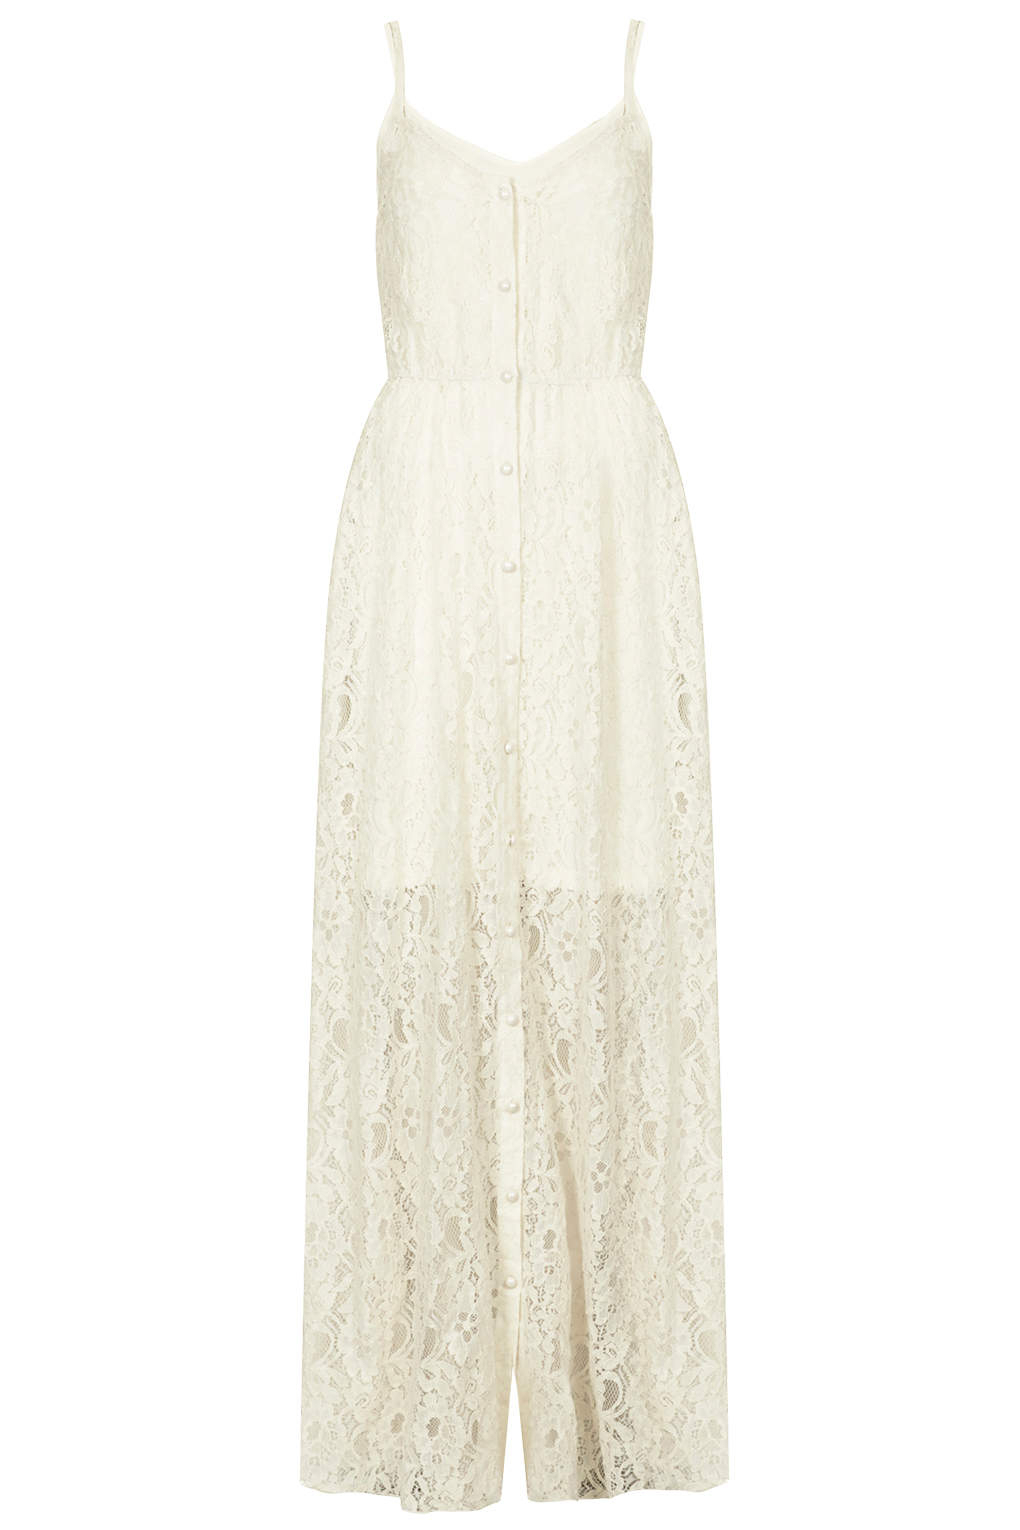 Lyst - Topshop Cream Lace Button Front Maxi Dress By Rare in Natural